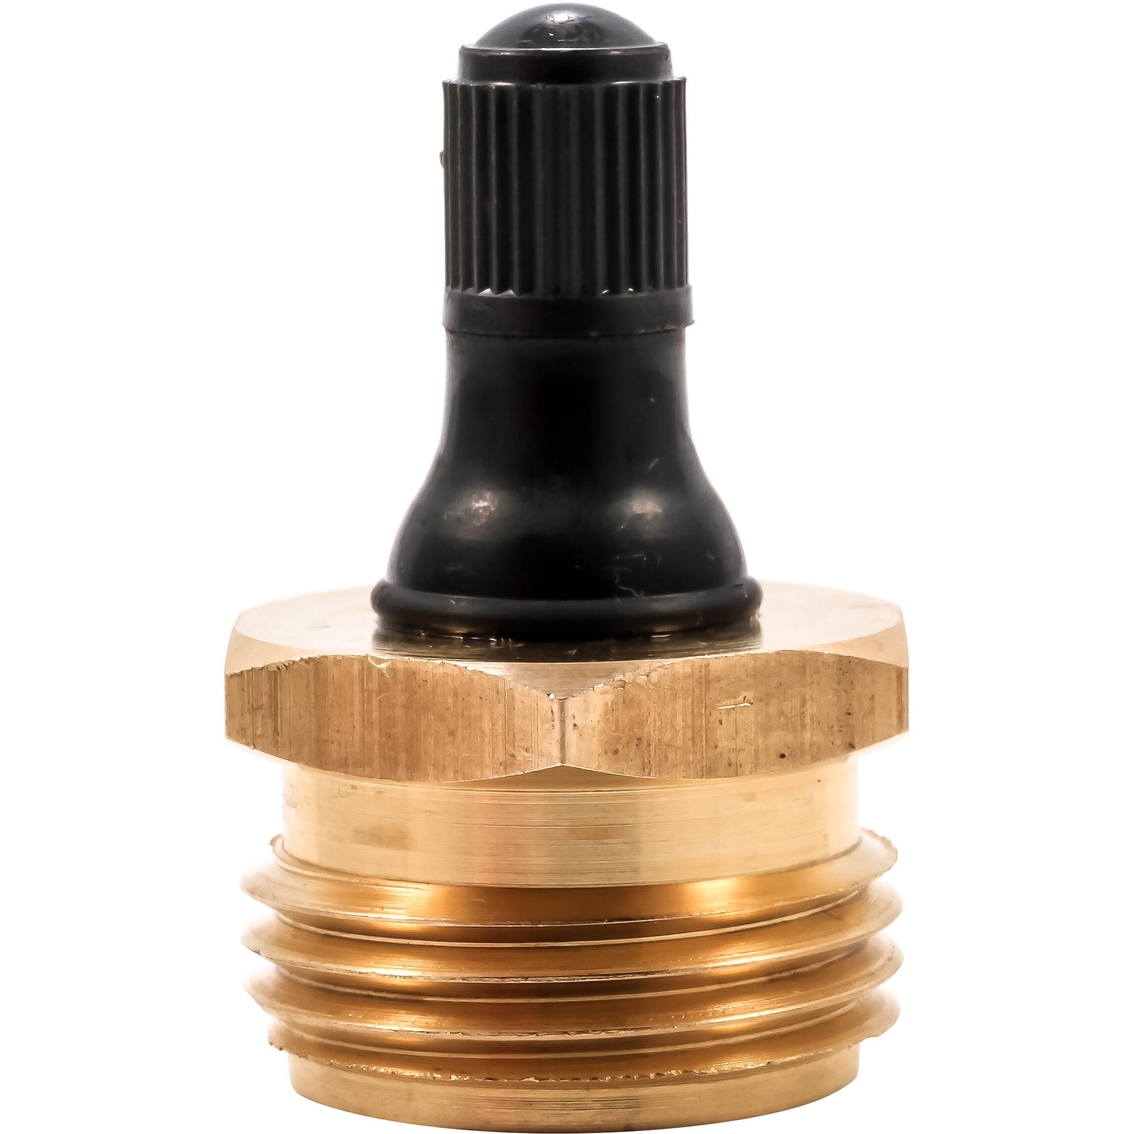 Camco RV Brass Blow Out Plug - Image 2 of 6